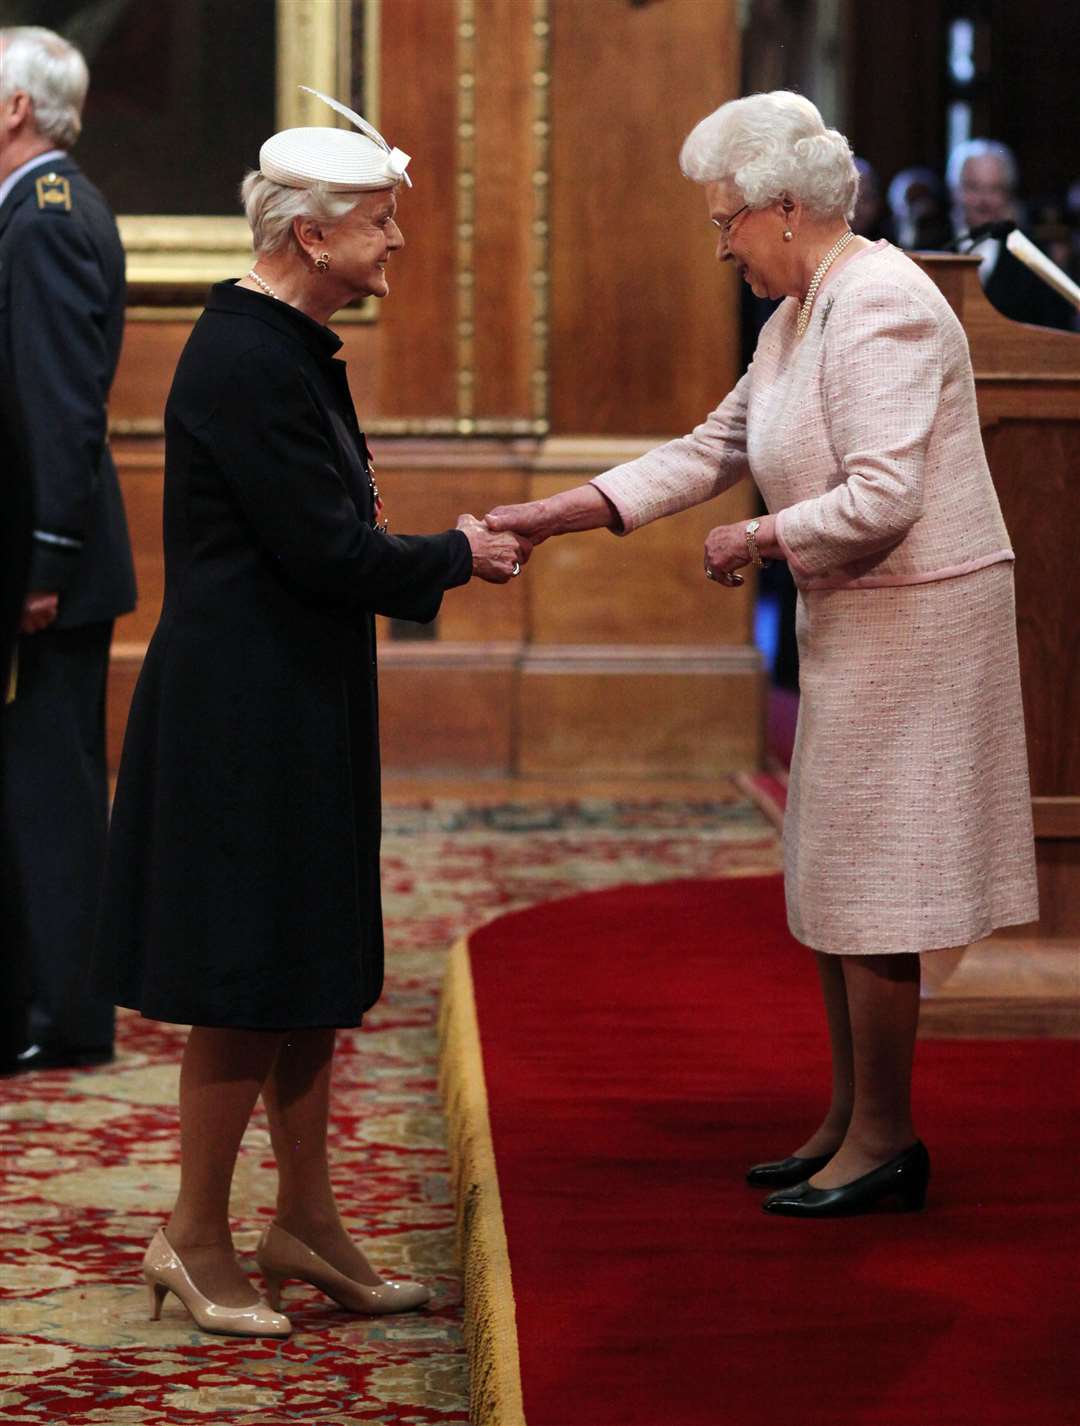 Angela Lansbury receiving her damehood from the Queen in 2014 (Jonathan Brady/PA)